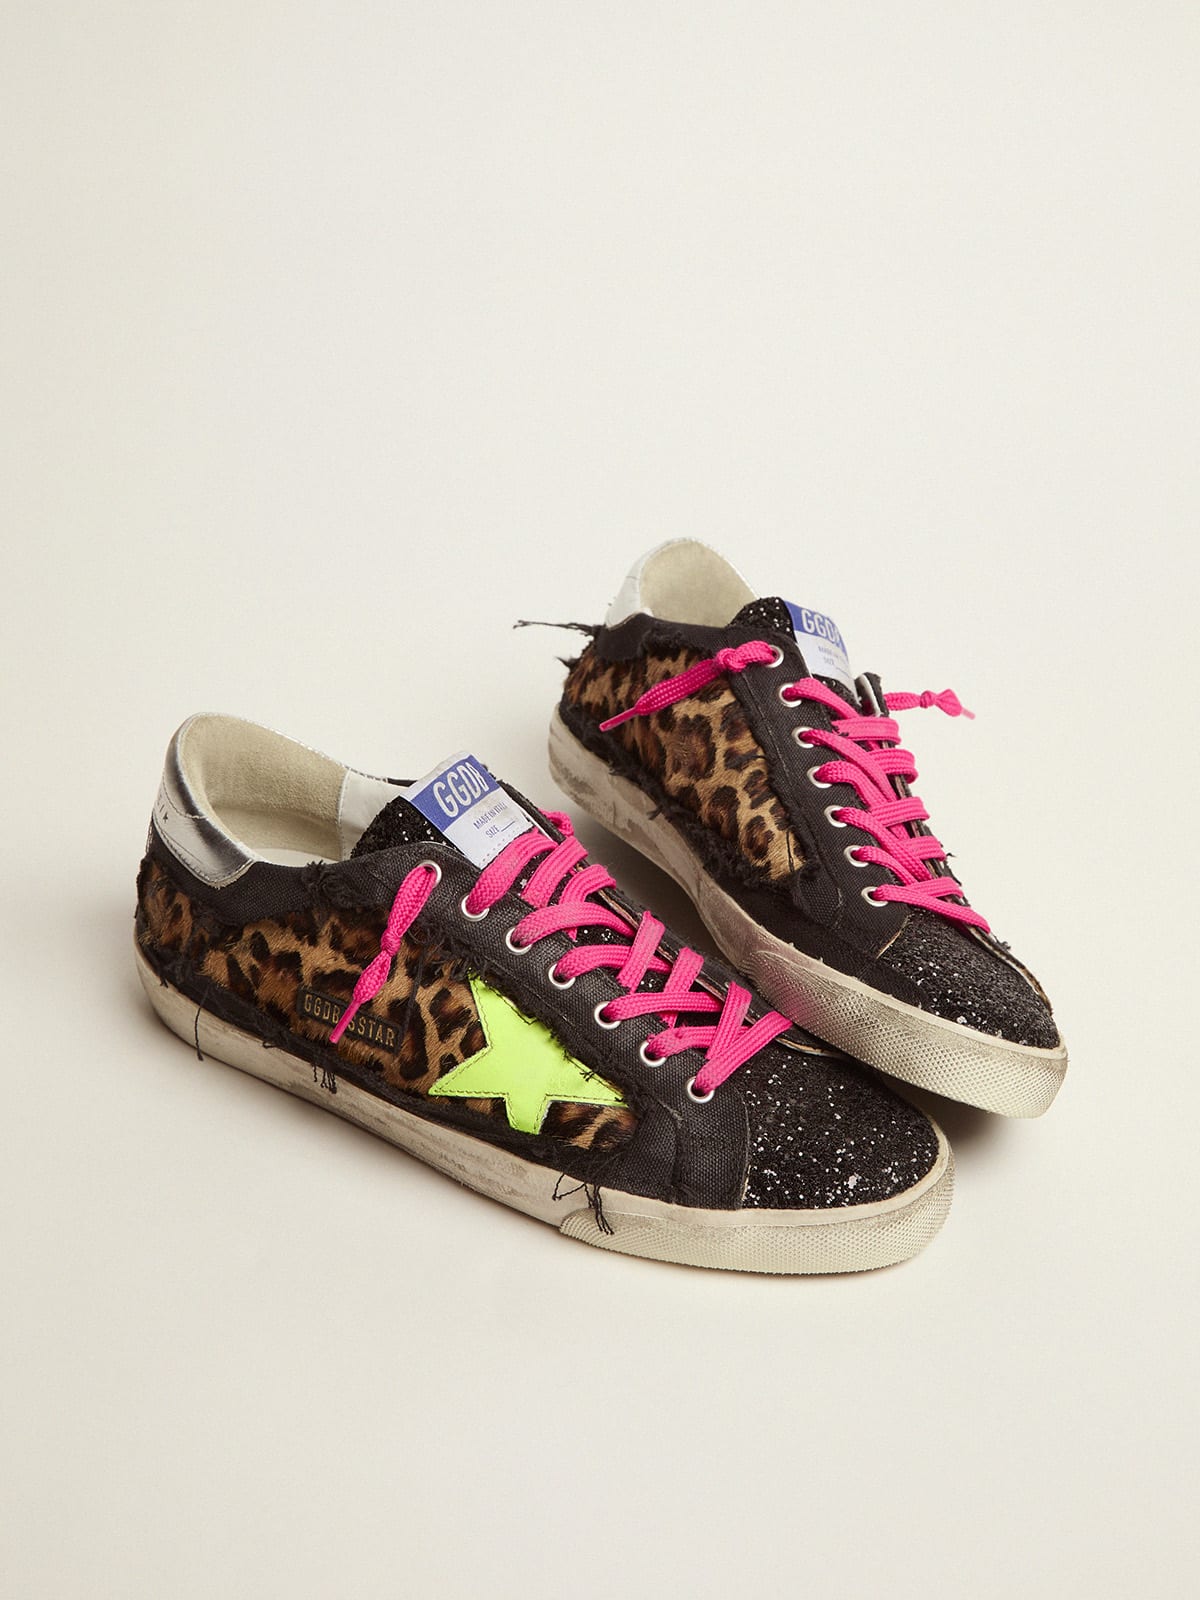 Golden Goose - Super-Star sneakers in leopard-print pony skin and black canvas in 